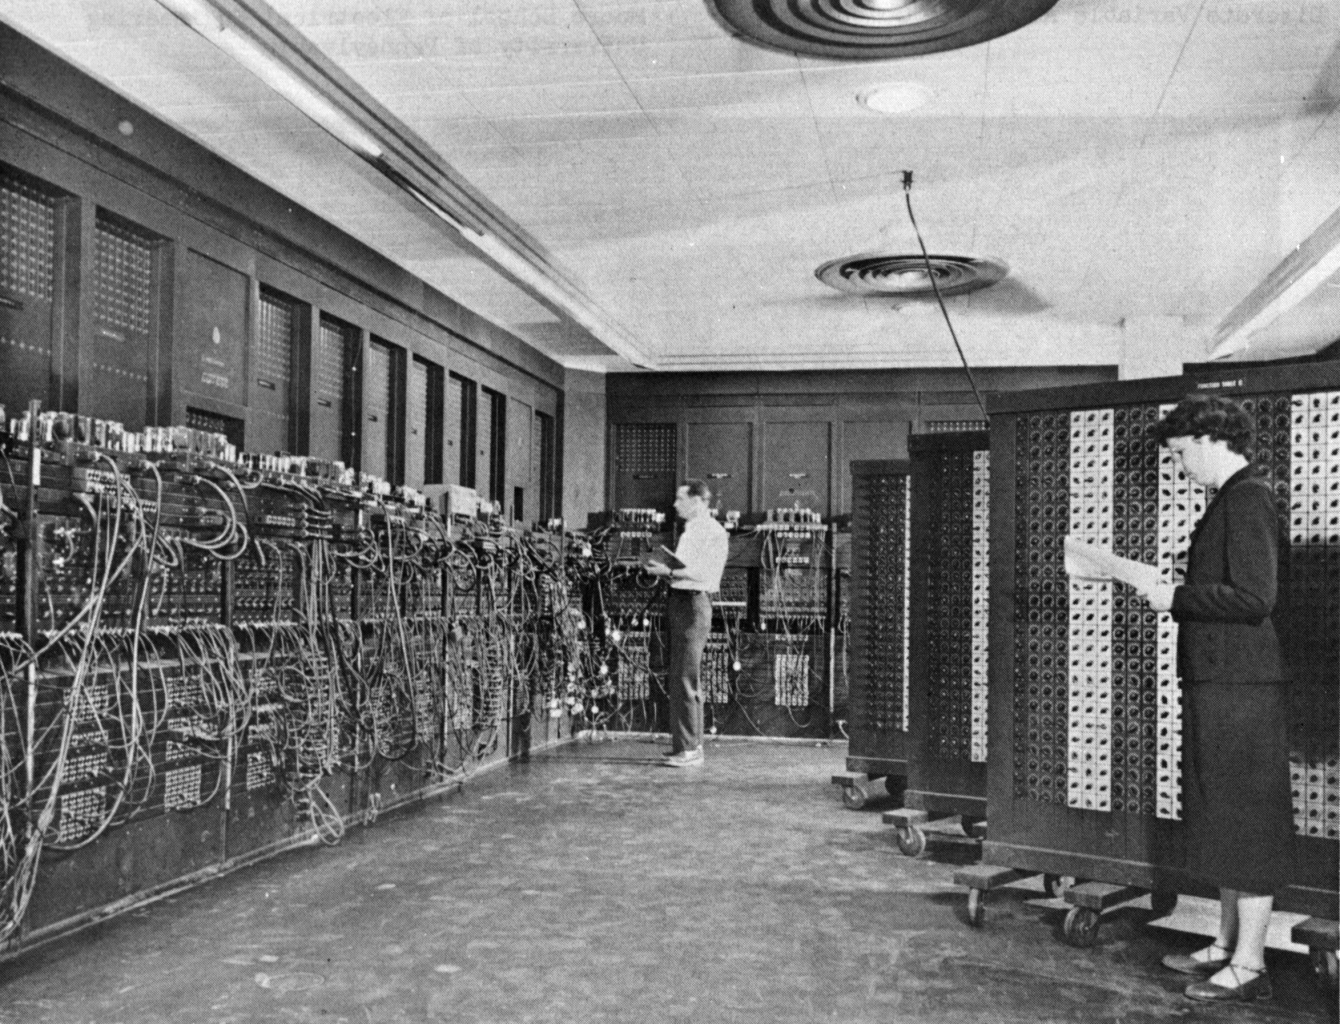 ENIAC (Electronic Numerical Integrator And Computer) in Philadelphia, Pennsylvania. Glen Beck (background) and Betty Snyder (foreground) program the ENIAC in building 328 at the Ballistic Research Laboratory (BRL).